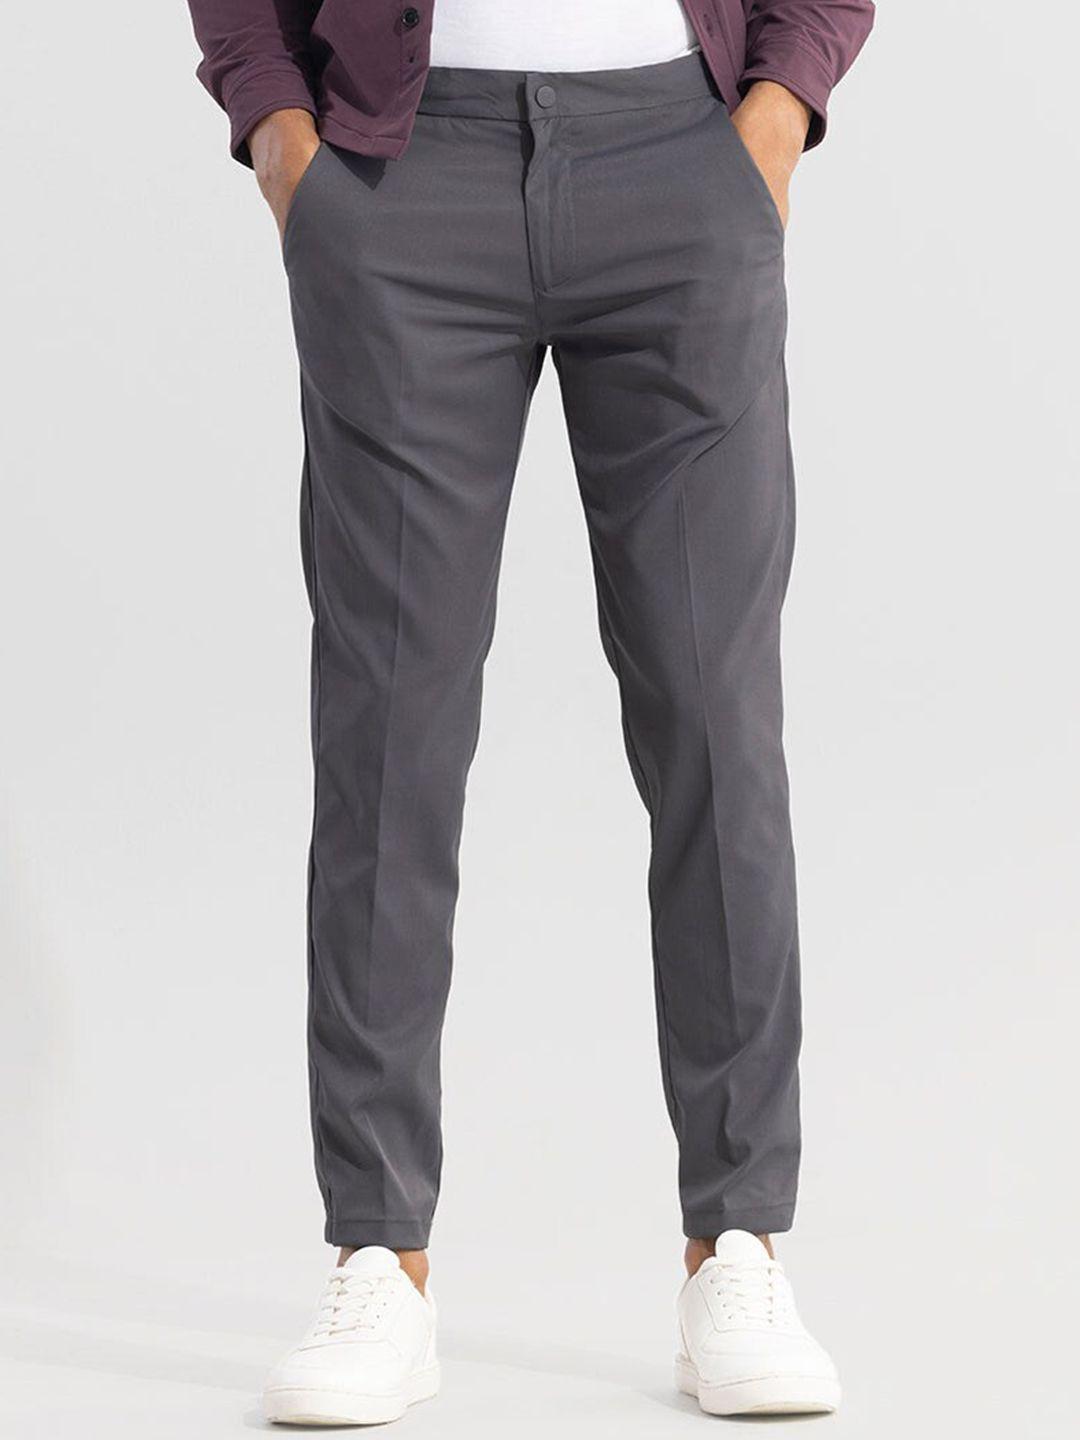 snitch-men-grey-smart-slim-fit-mid-rise-trousers